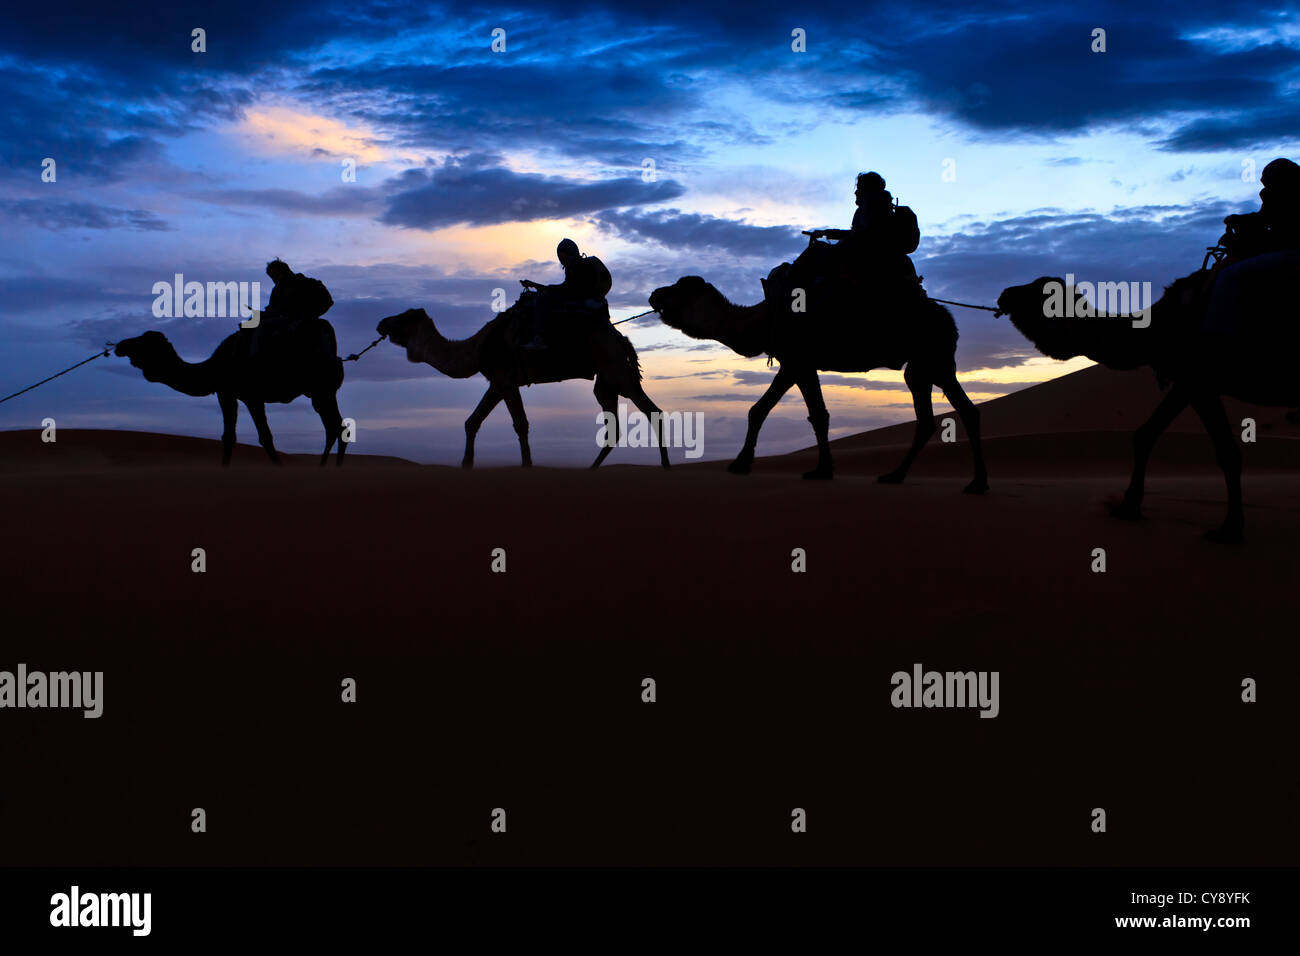 Four Camel train silhouetted against colorful sunset sky in the Sahara Desert Morocco Stock Photo